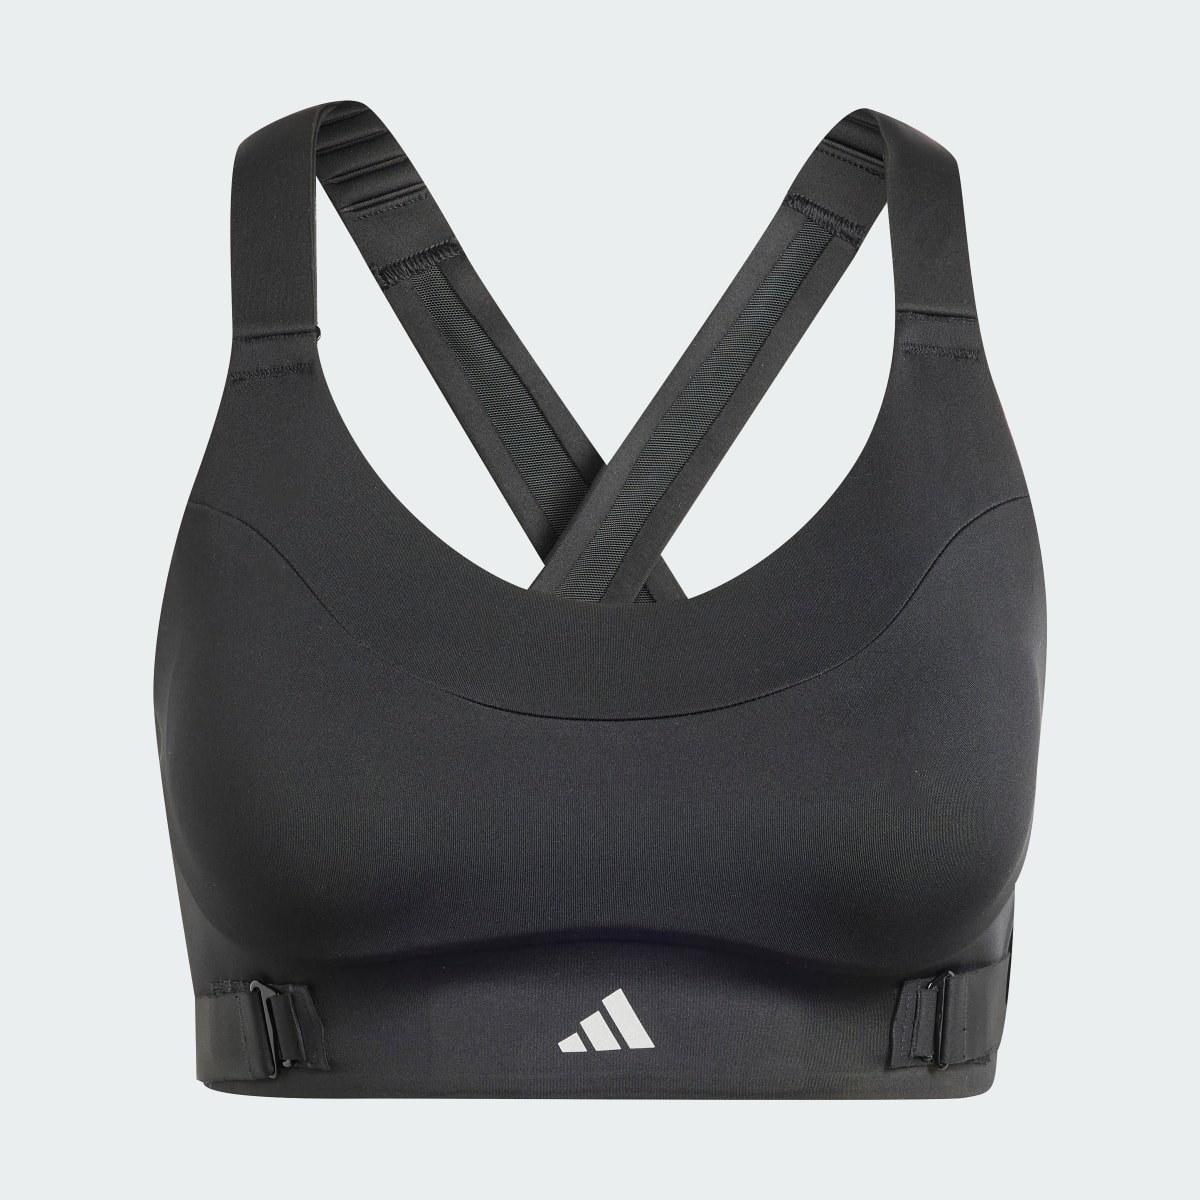 Adidas Brassière Collective Power Fastimpact Luxe Maintien fort. 5